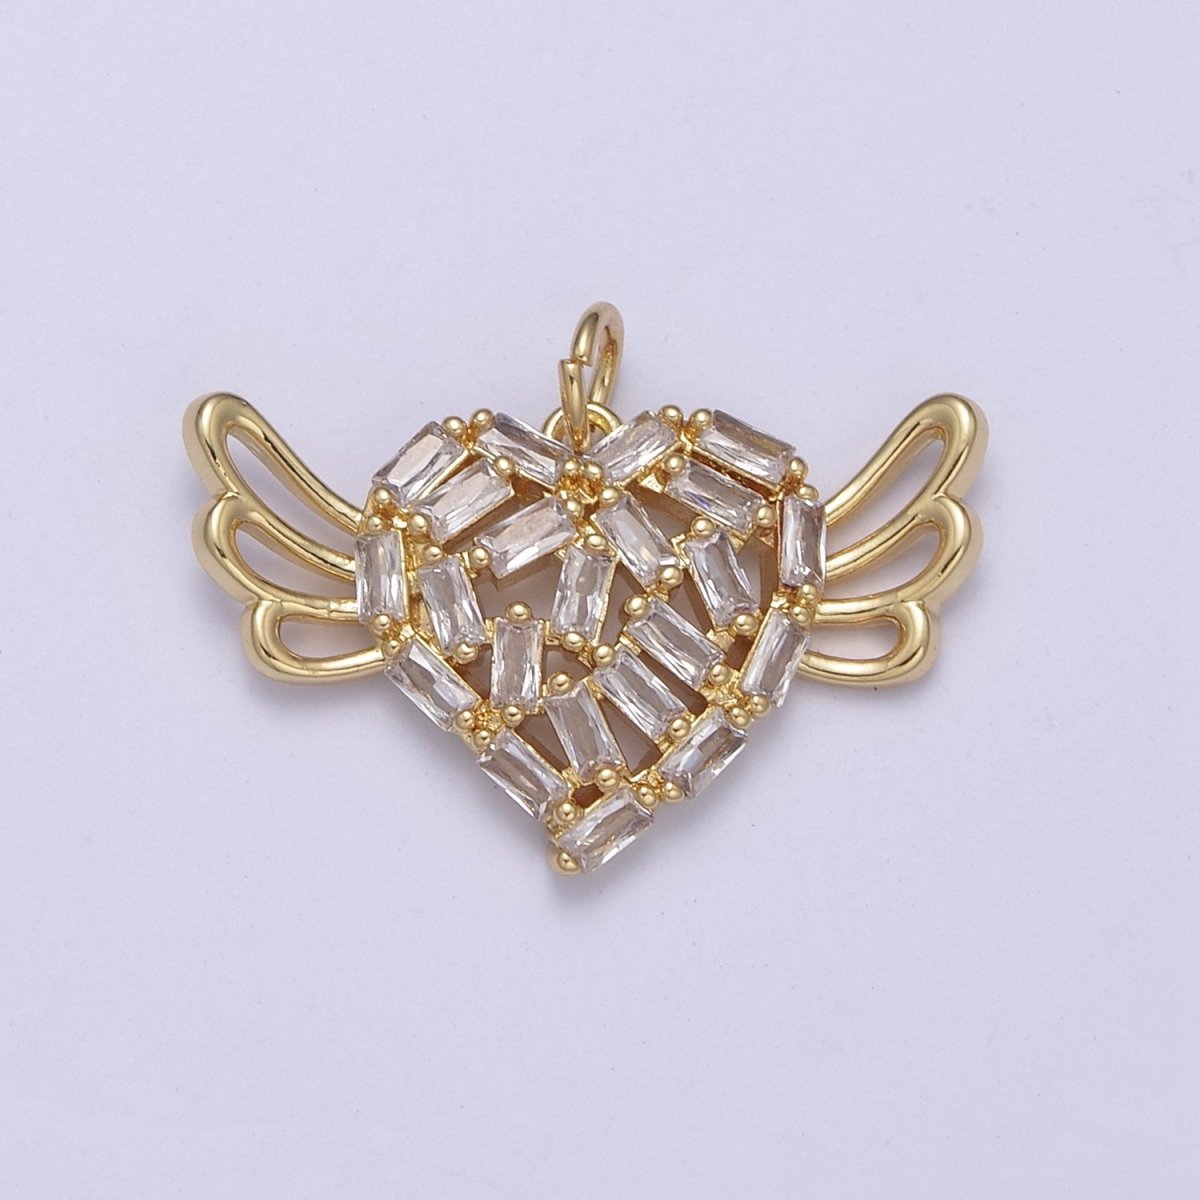 Gold Filled Winged Heart Charm. Angel Wings Heart Charm Cz Baguette Charm Flying Heart Charm C-307 - DLUXCA